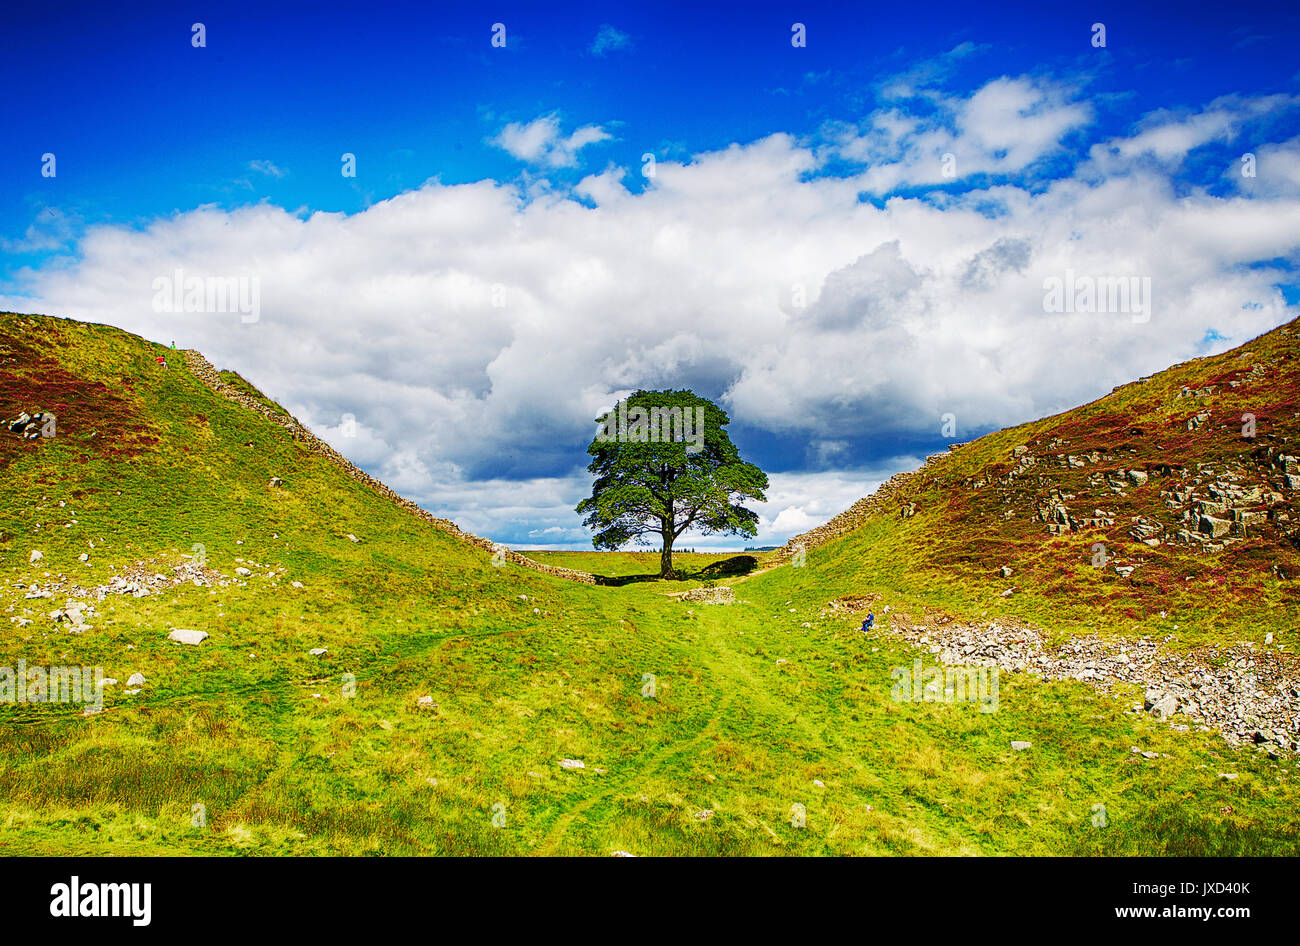 Sycamore Gap, located on Hadrians Wall, Northumberland, North England  Movie location for Robin Hood Stock Photo